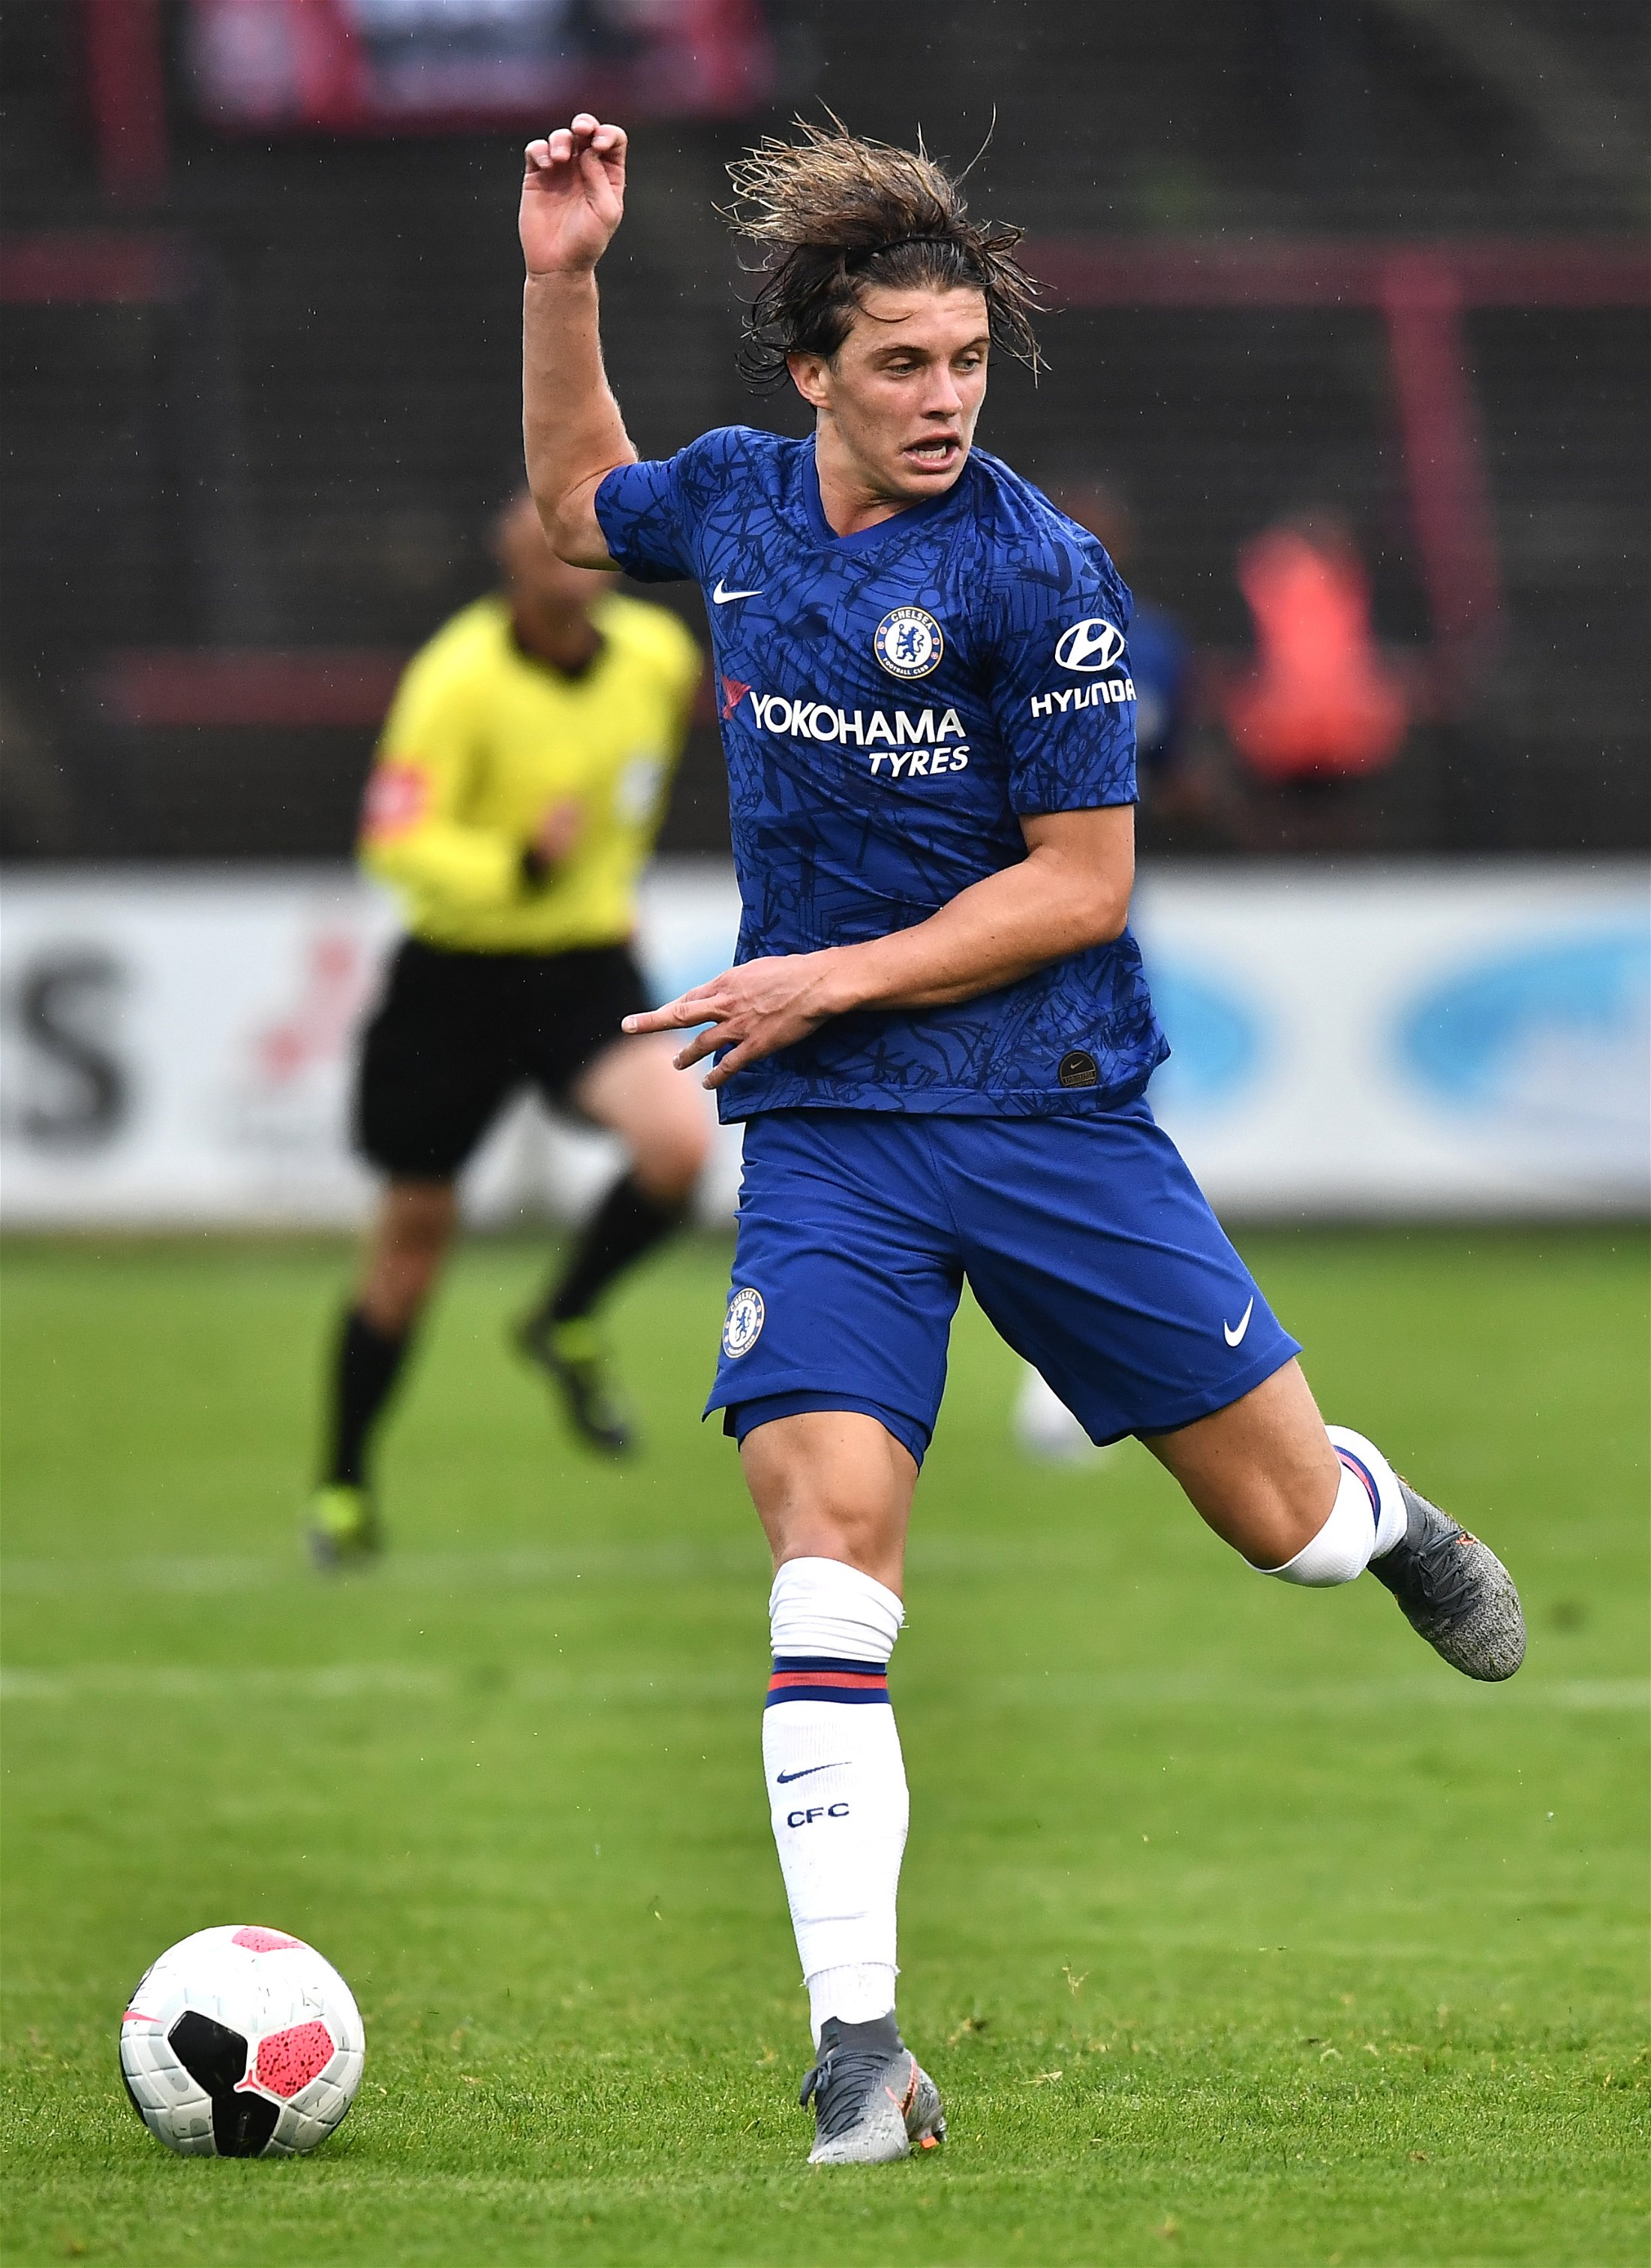 Connor Gallagher - 6 - Read Chelsea